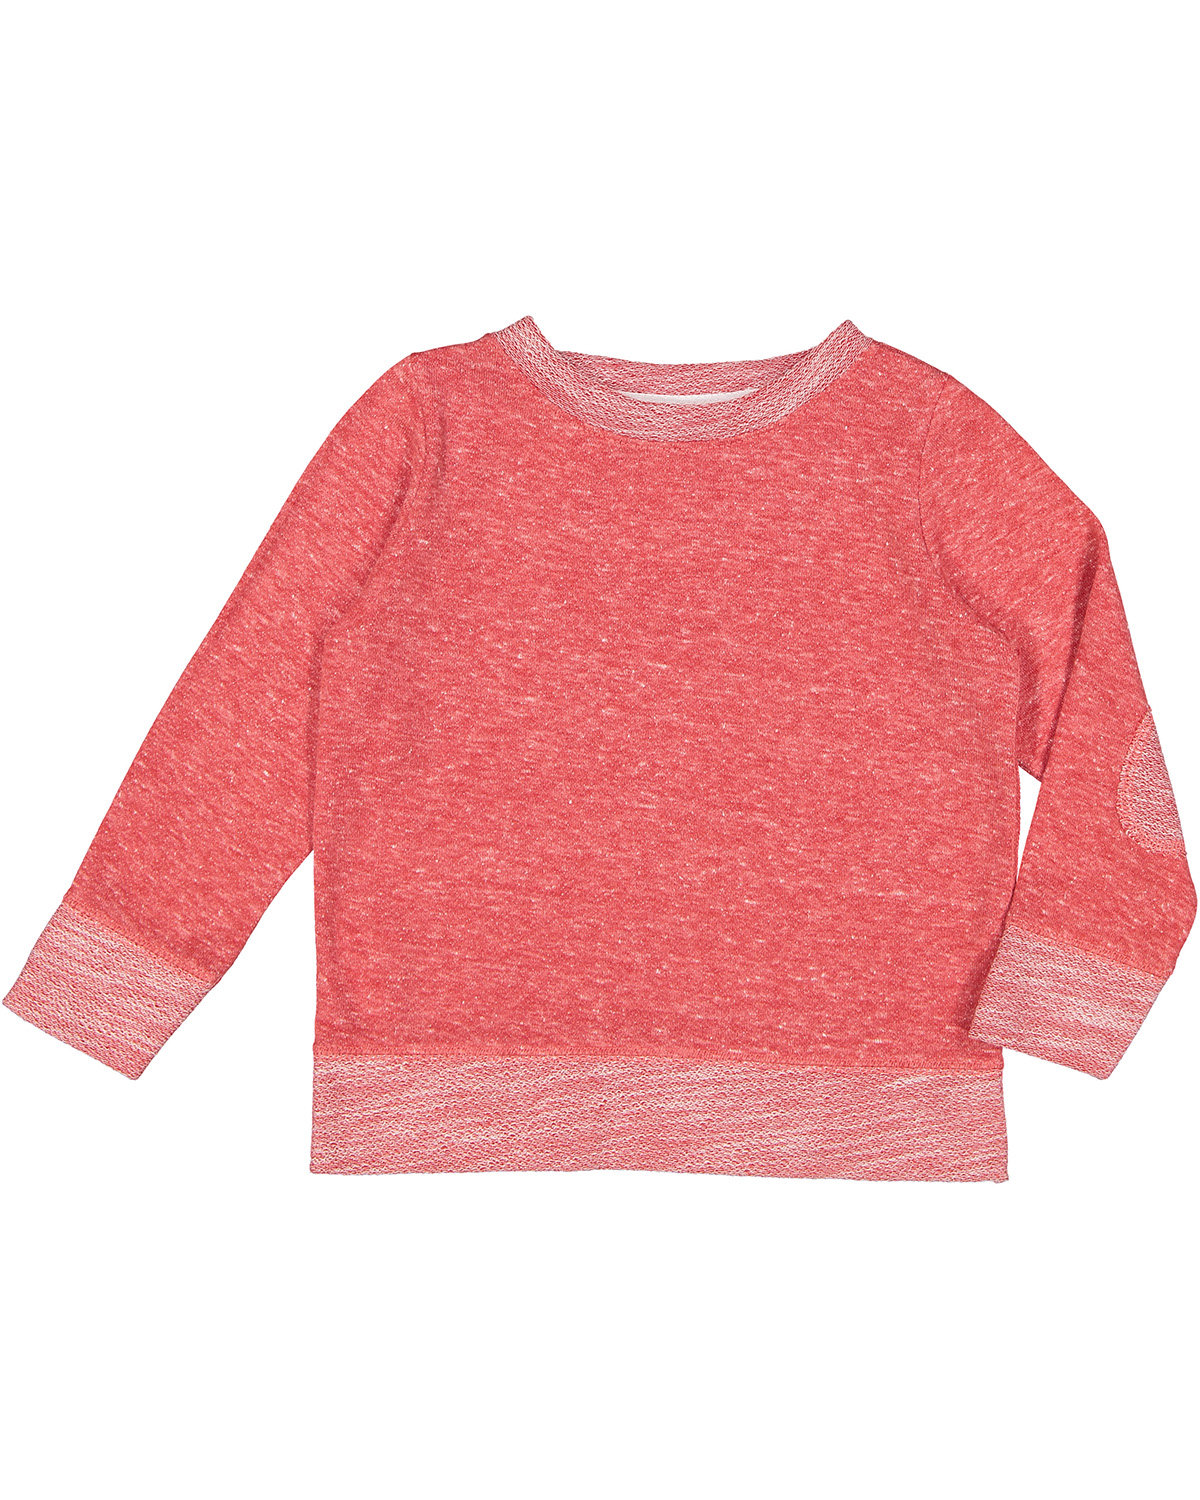 Rabbit Skins Toddler Harborside M/élange French Terry Long Sleeve Crew Neck with Elbow Patches